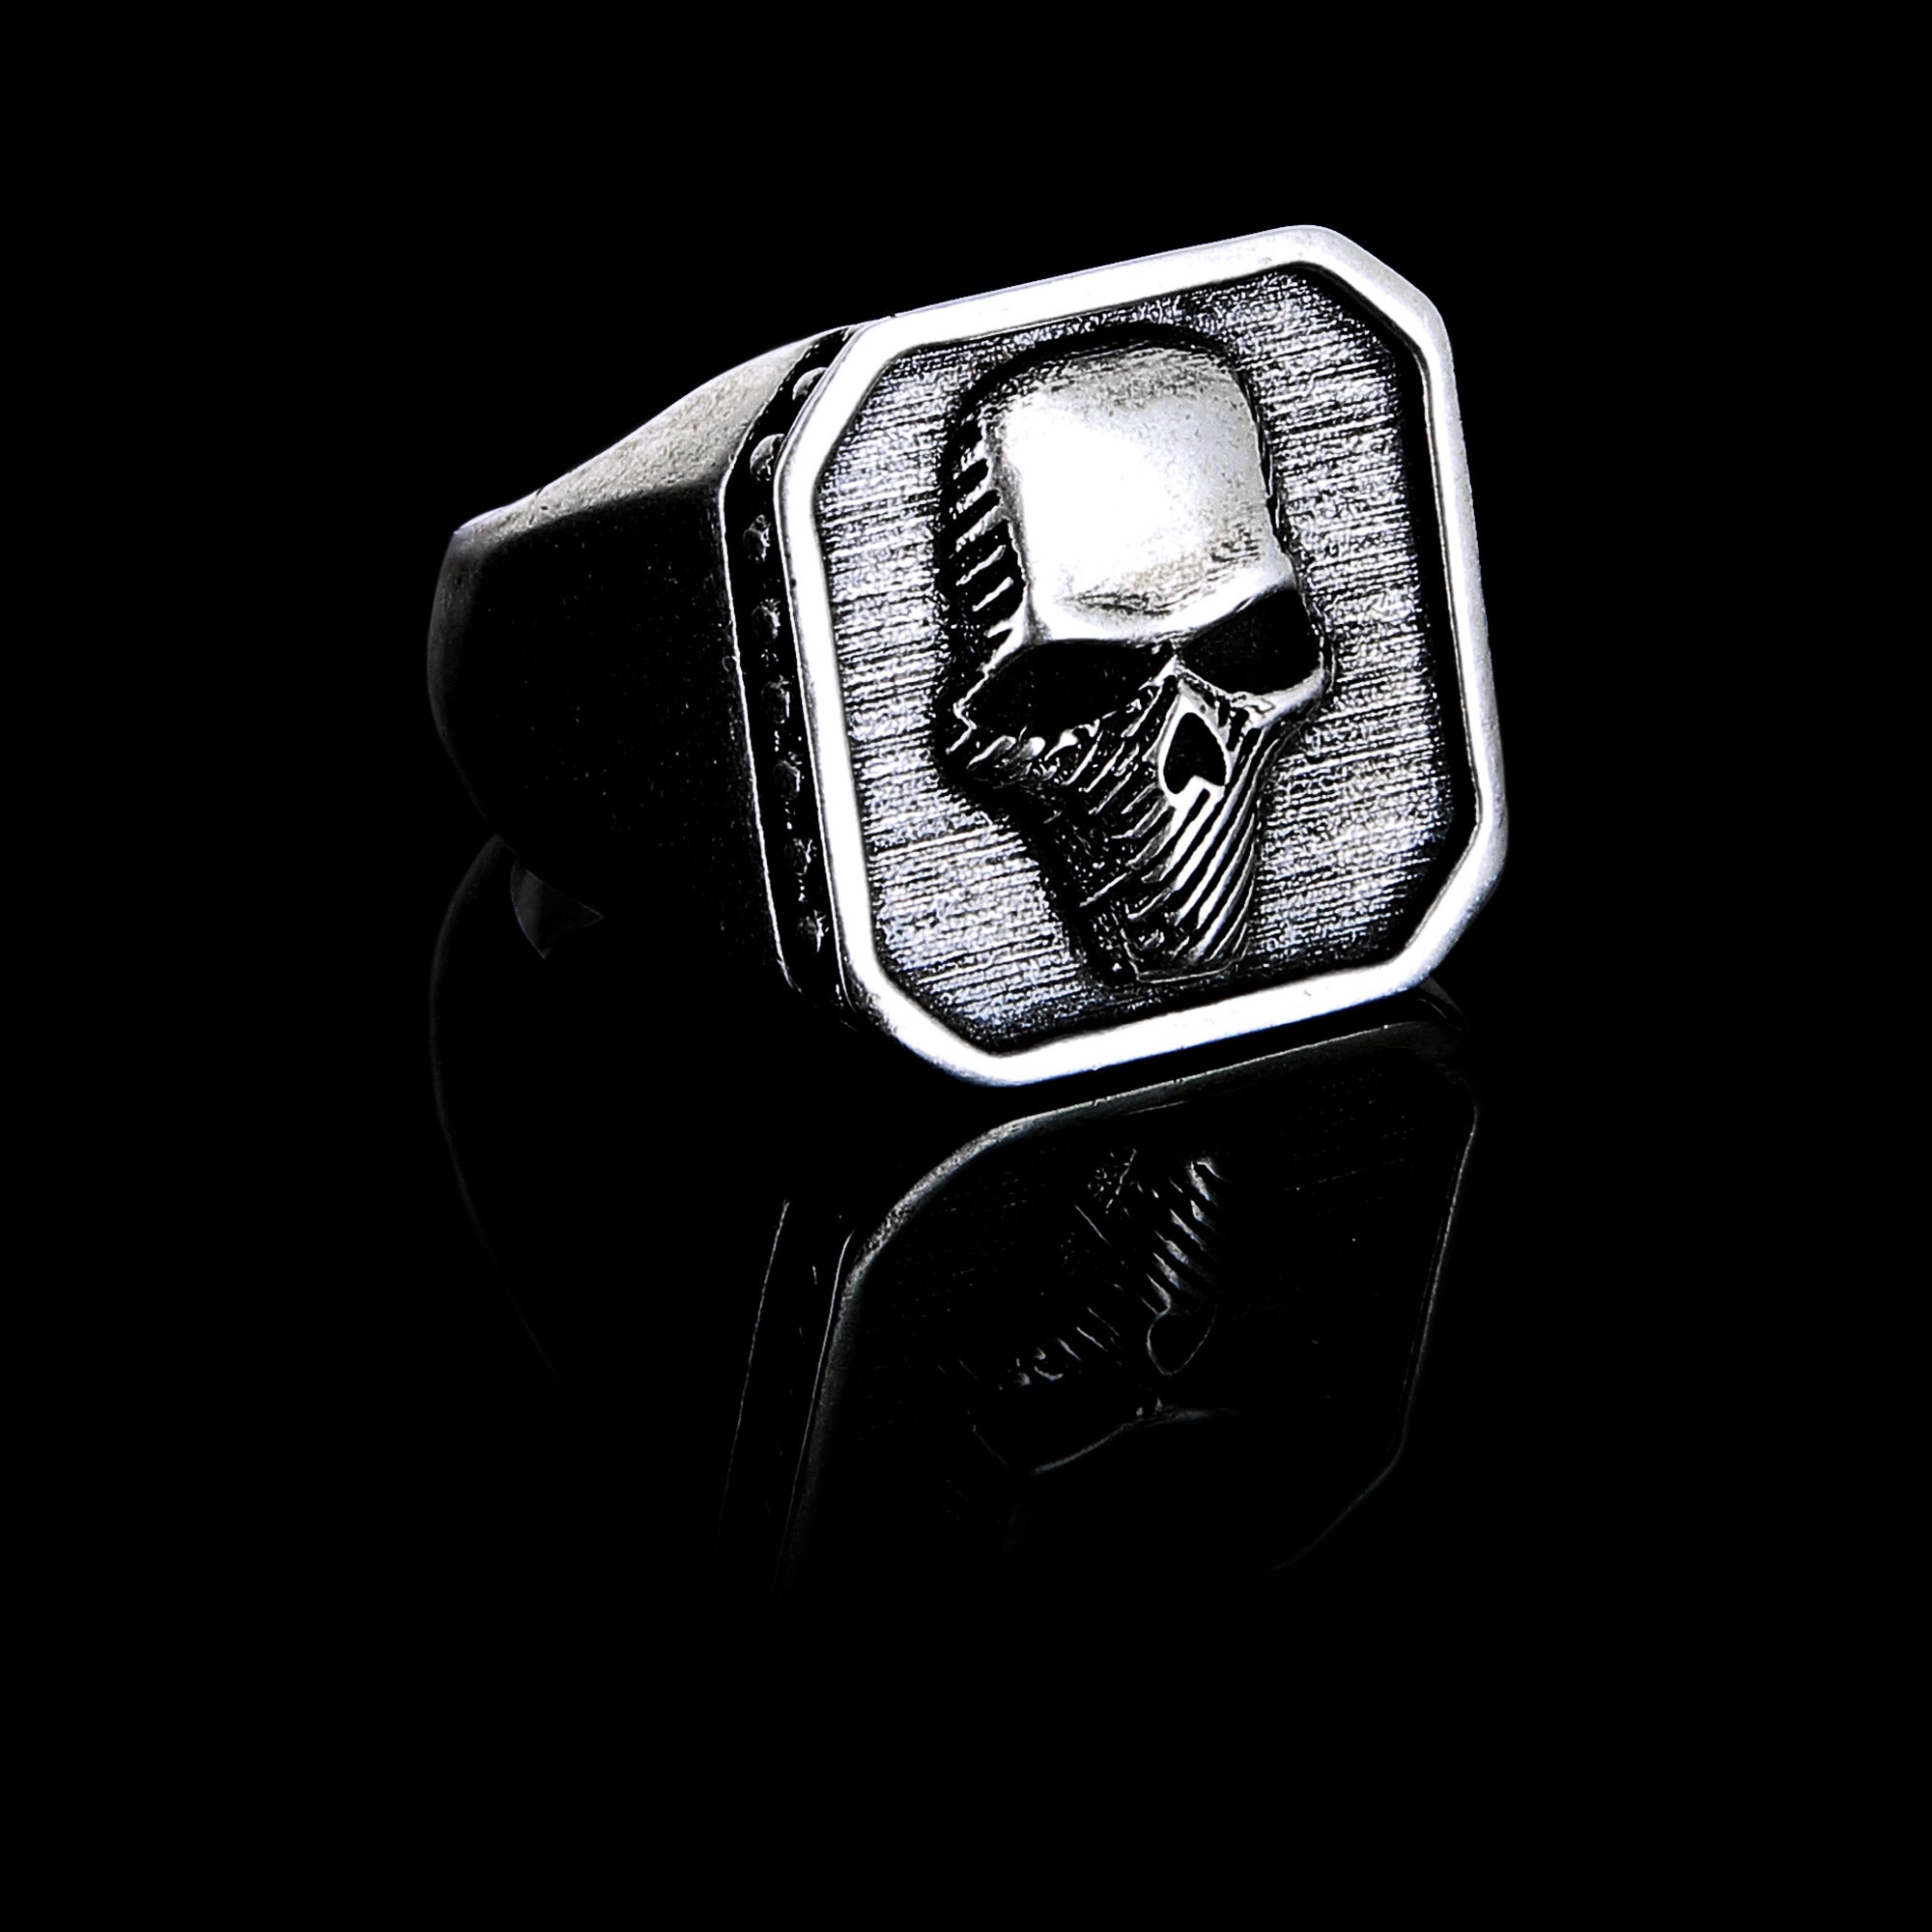 Ghost Signet - Officially licensed Ghost Recon Breakpoint limited edition signet ring